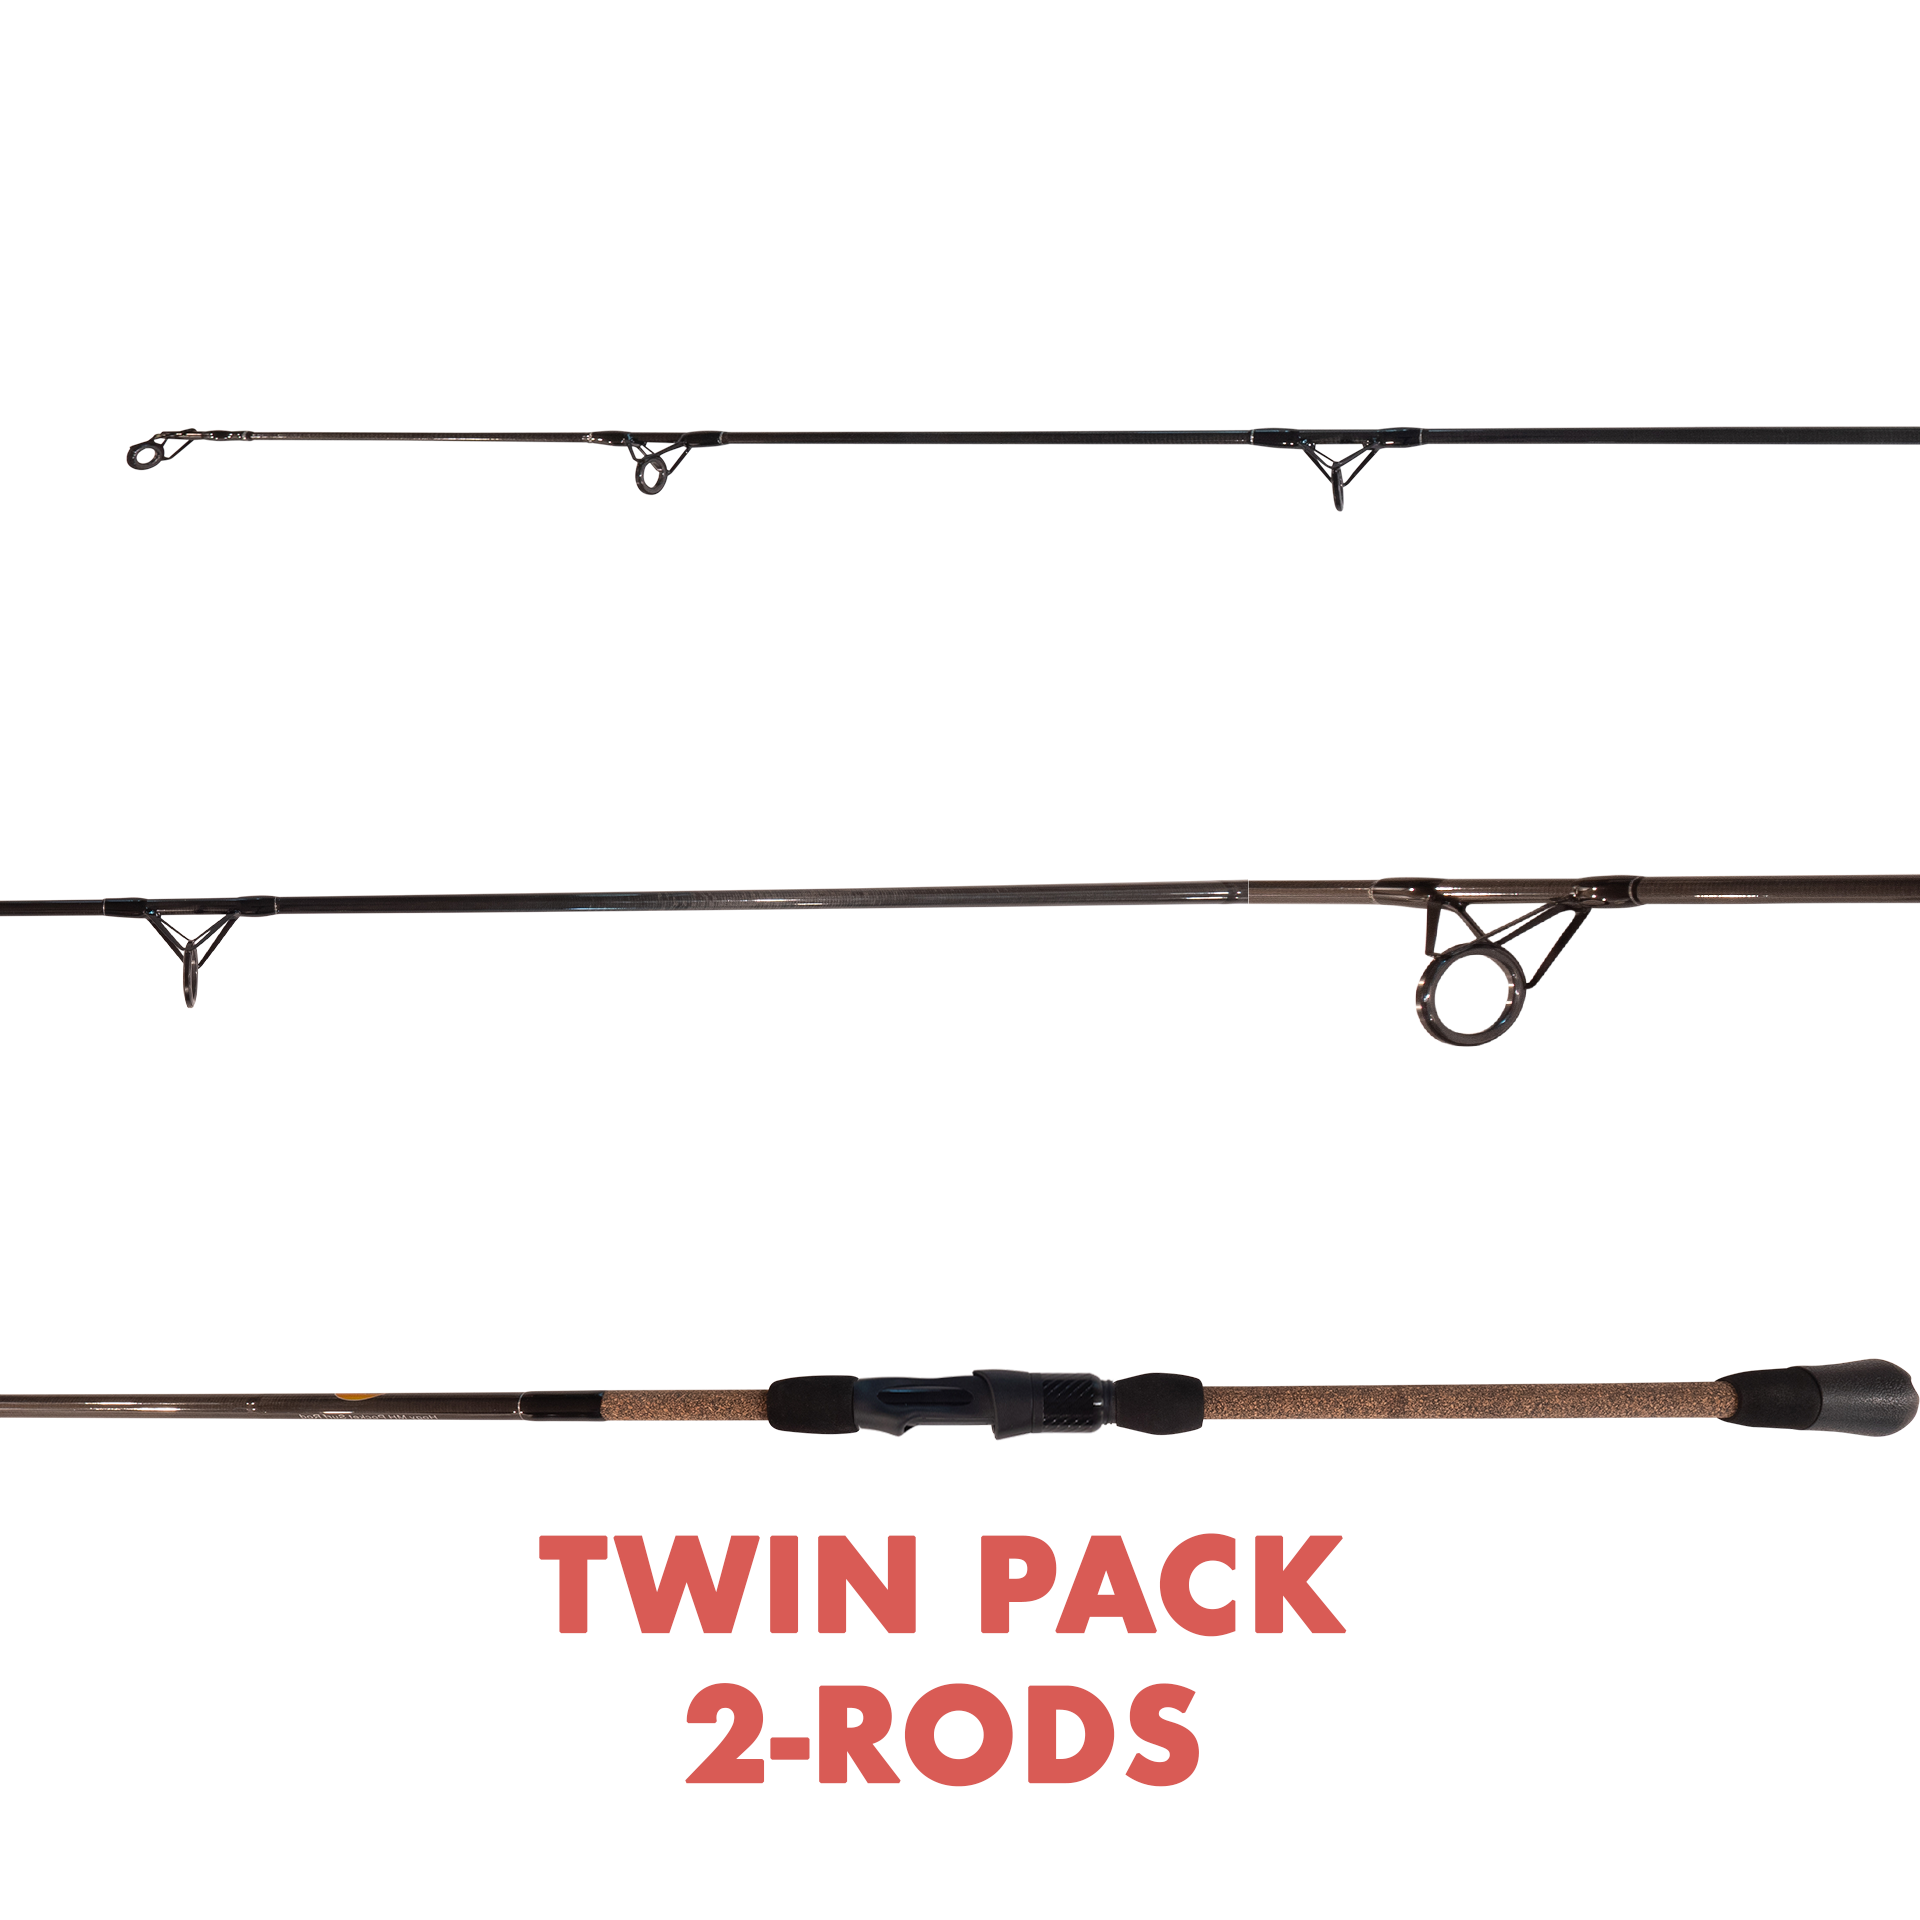 TWIN PACK Pocket Surf Rod: Mod-Fast Action 7' ML (3/8oz - 1oz) (Ship Date By 5/15)